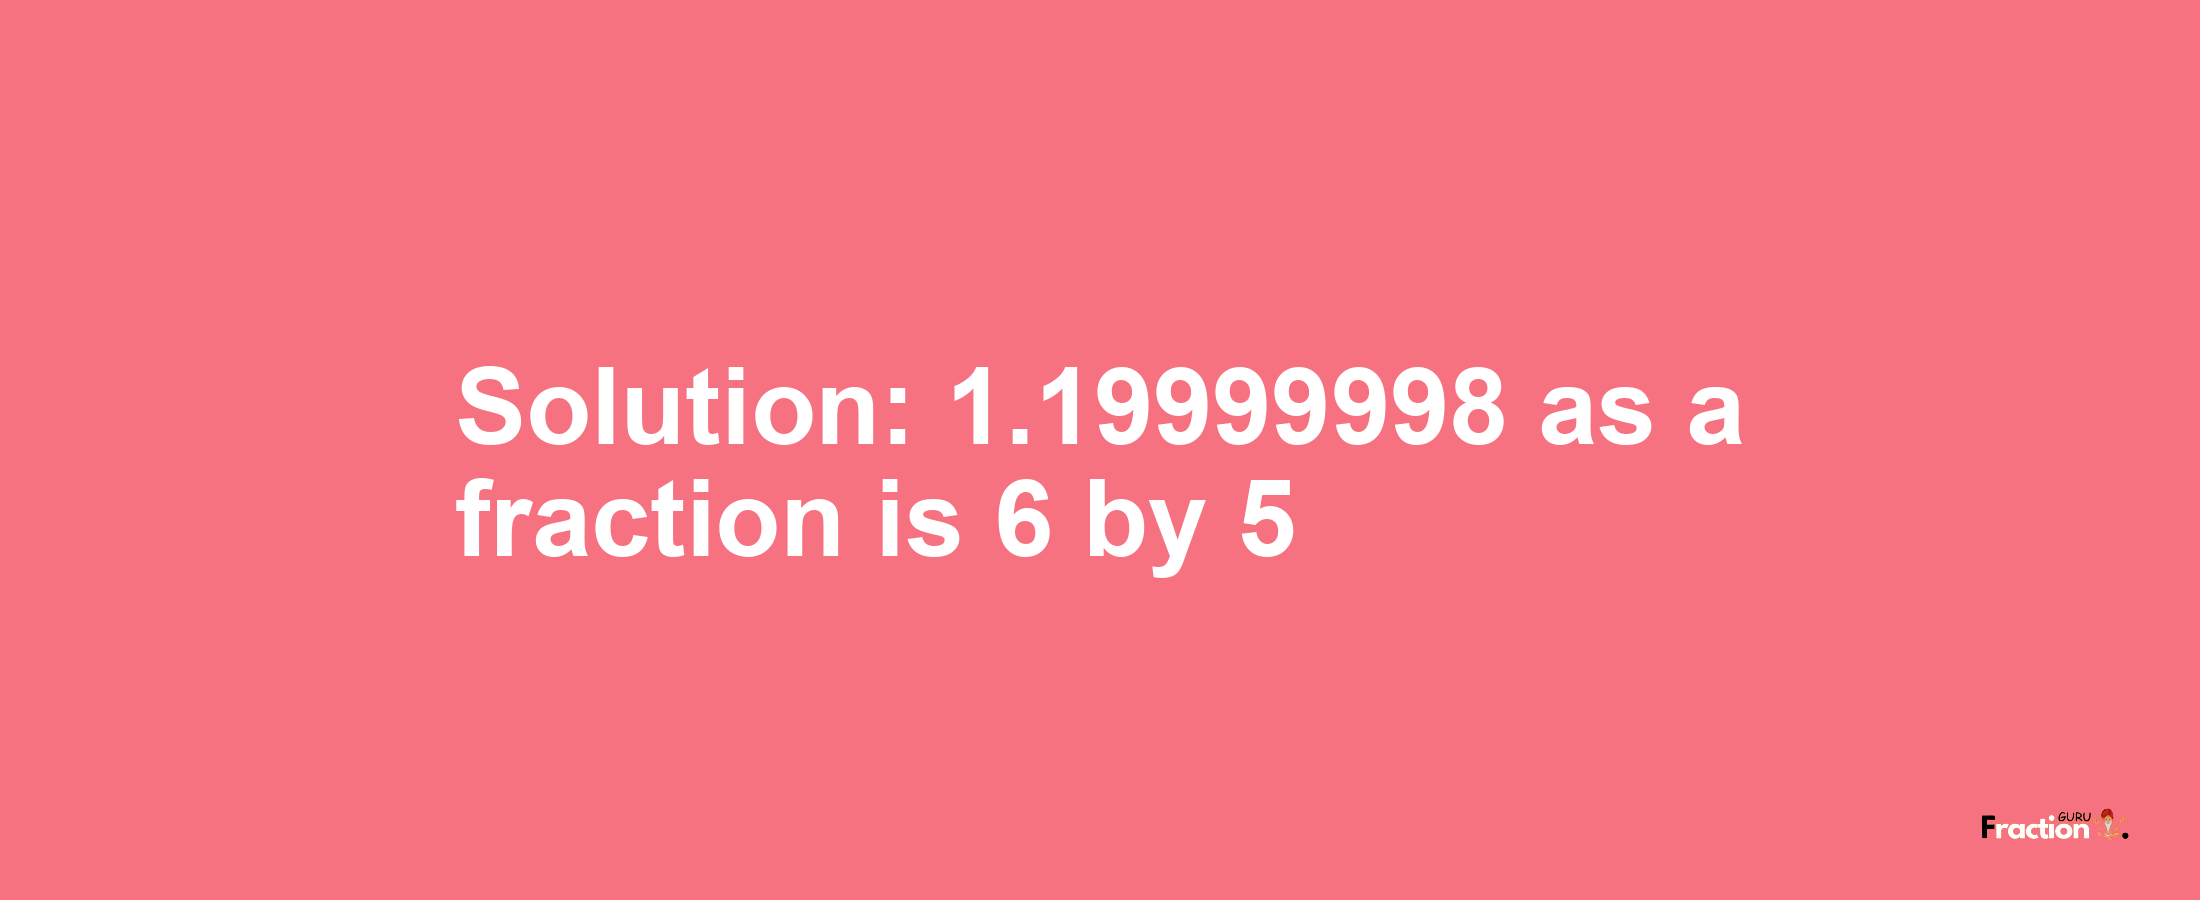 Solution:1.19999998 as a fraction is 6/5